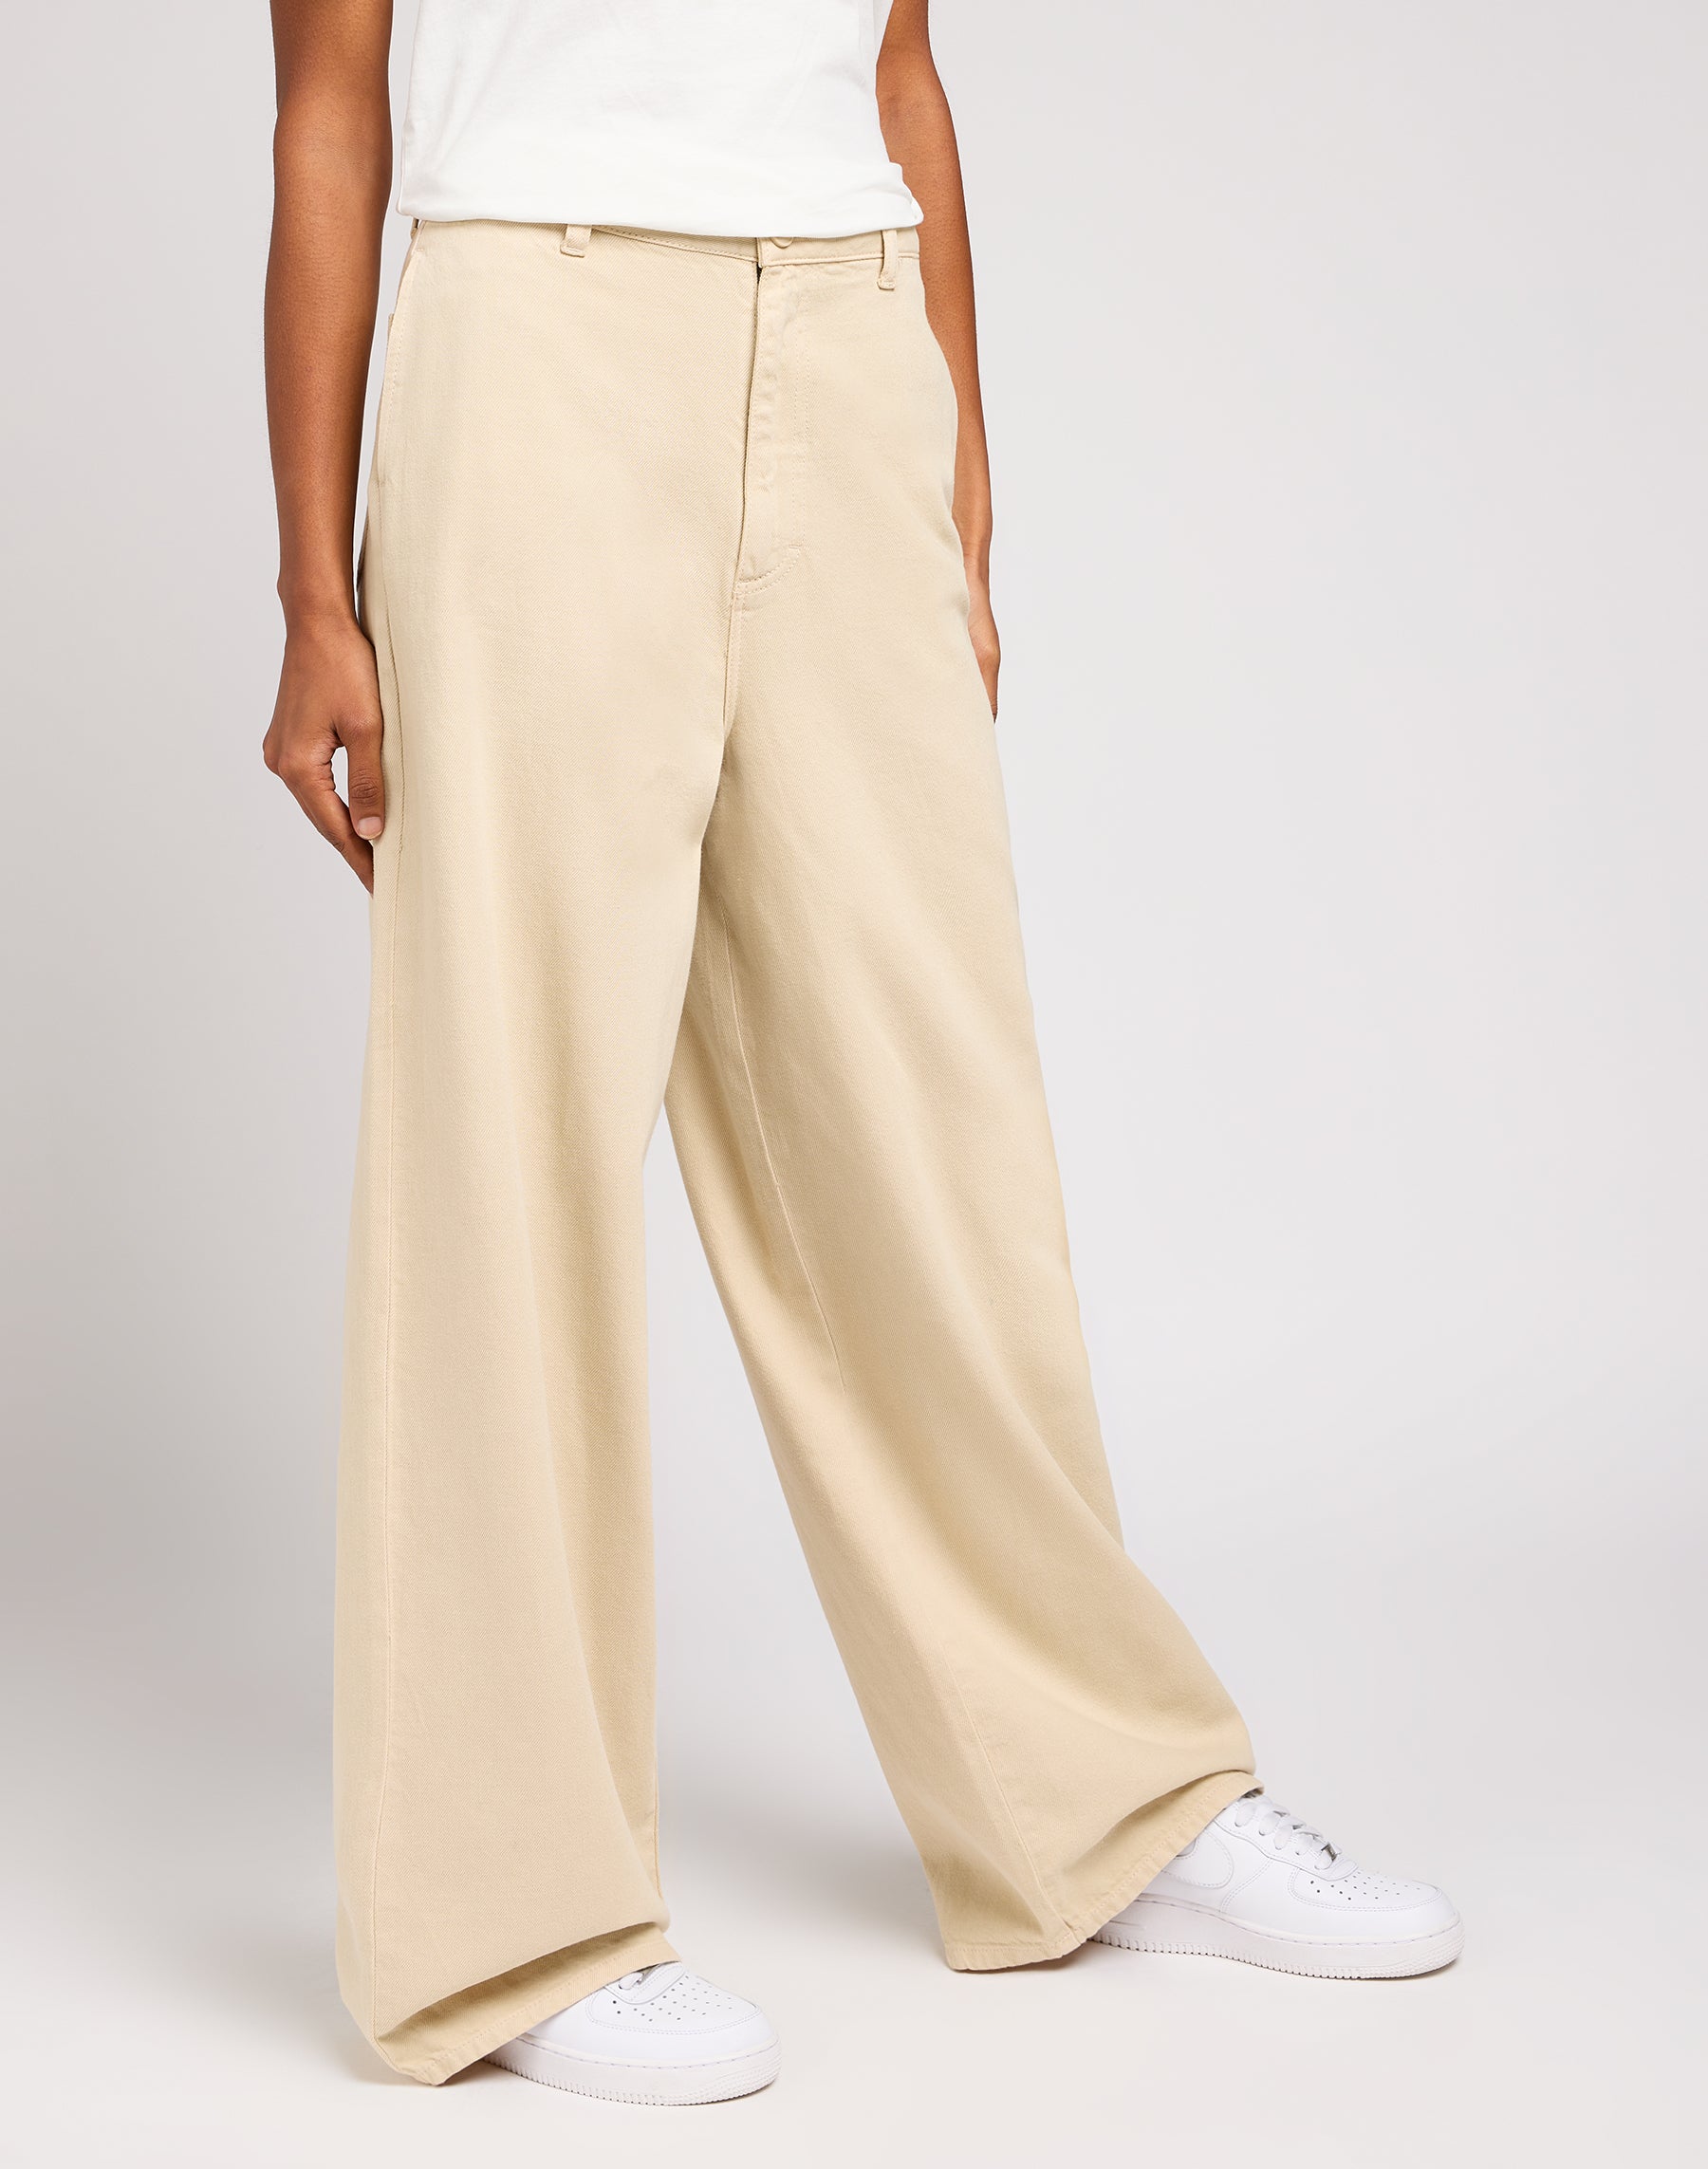 Relaxed Chino in Greige Hosen Lee   